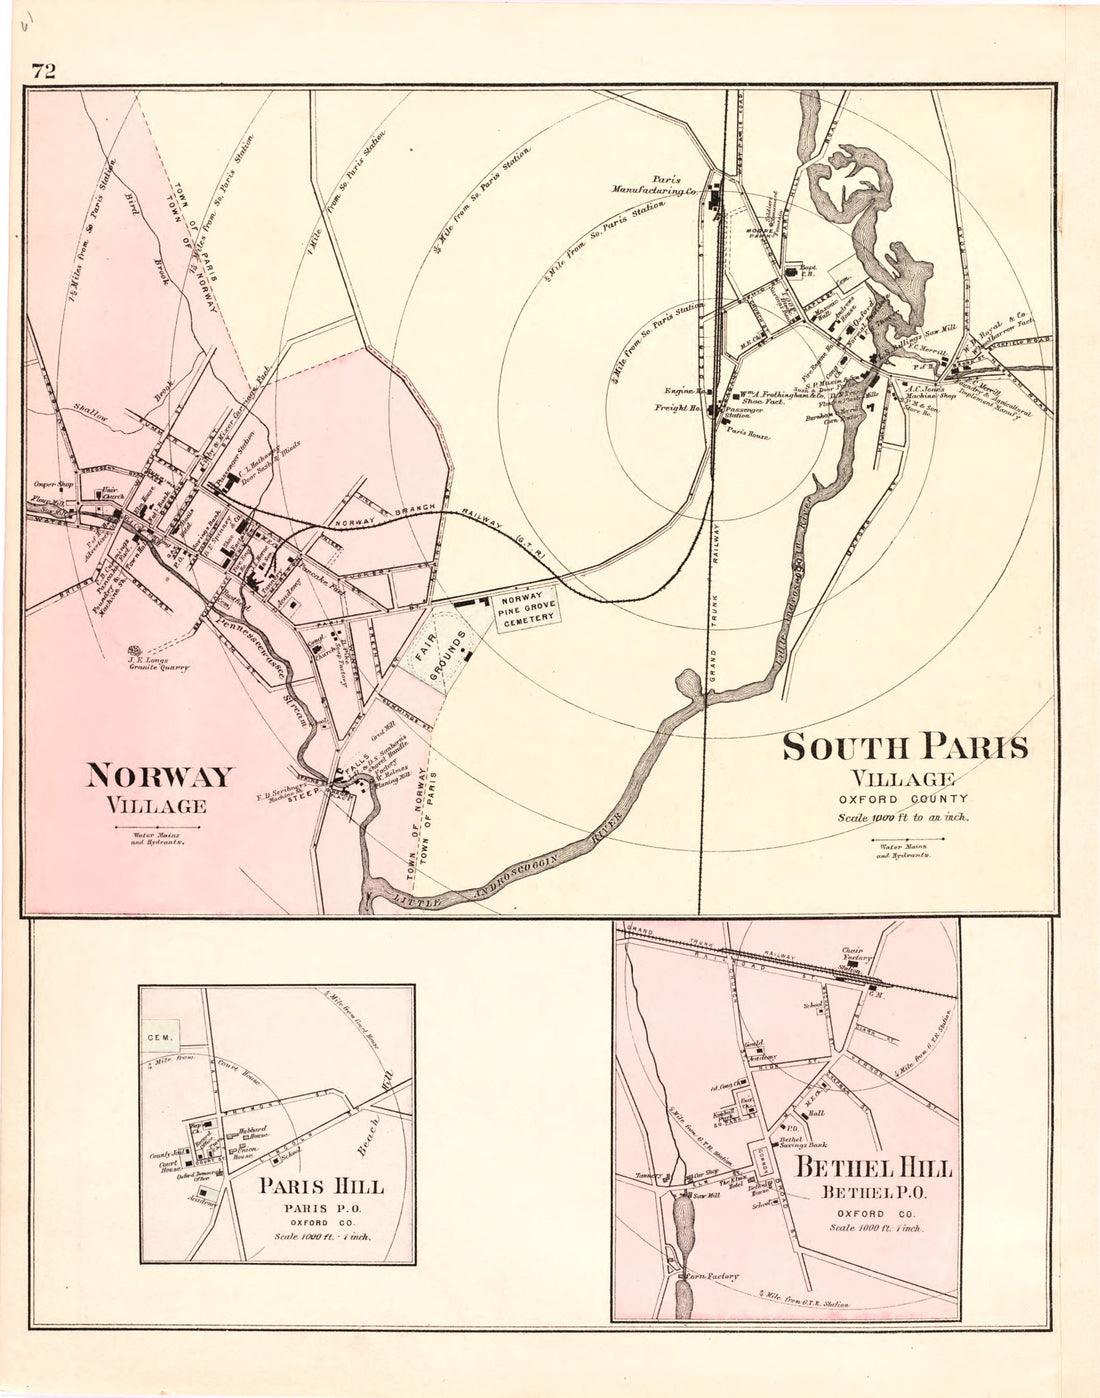 This hand drawn illustration (map) of Image 55 of Colby&